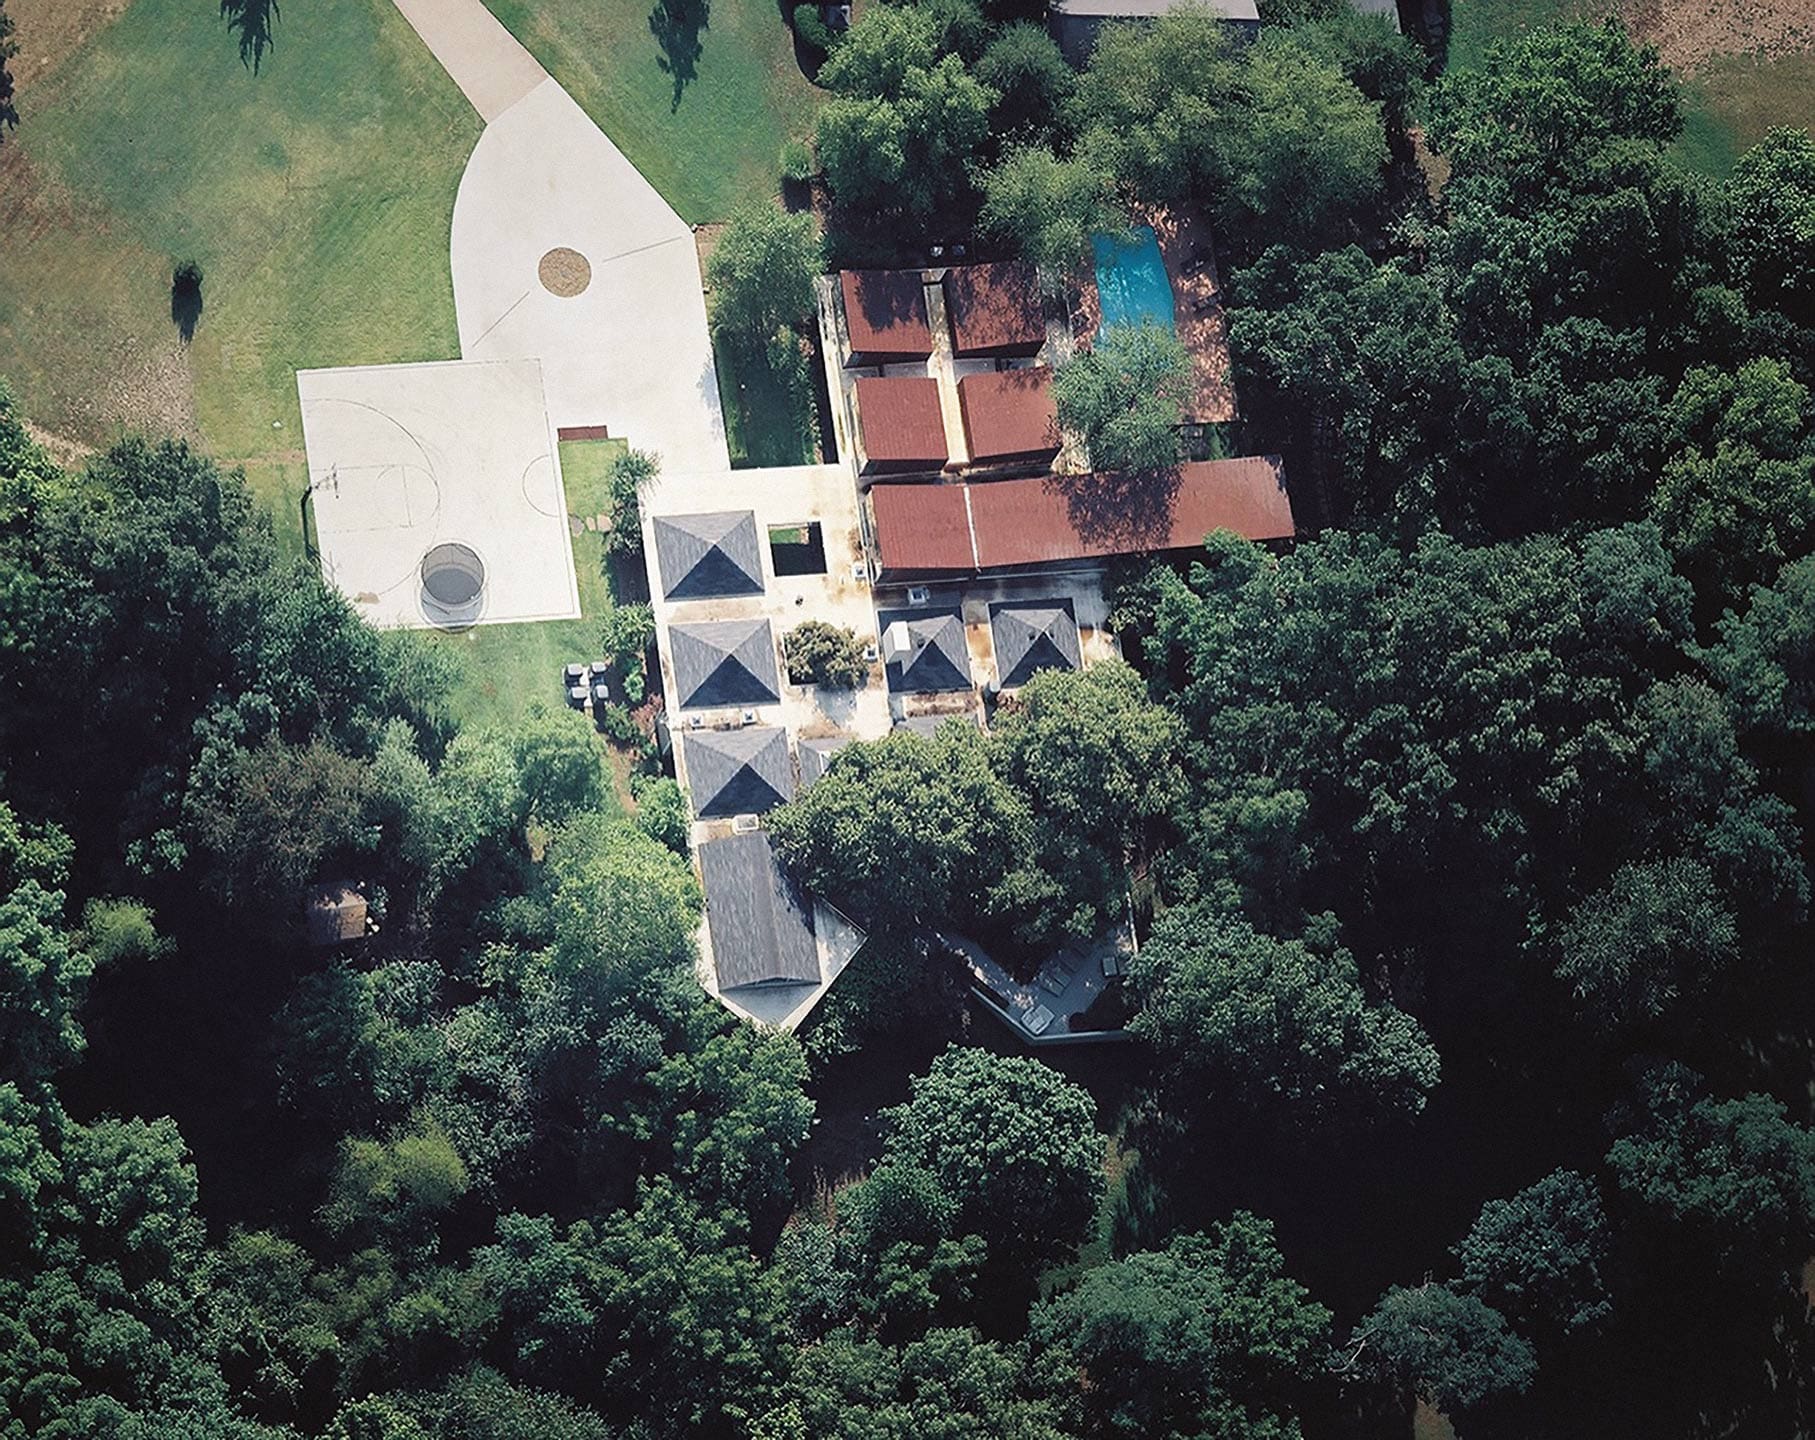 View of the Arkansas House from above.